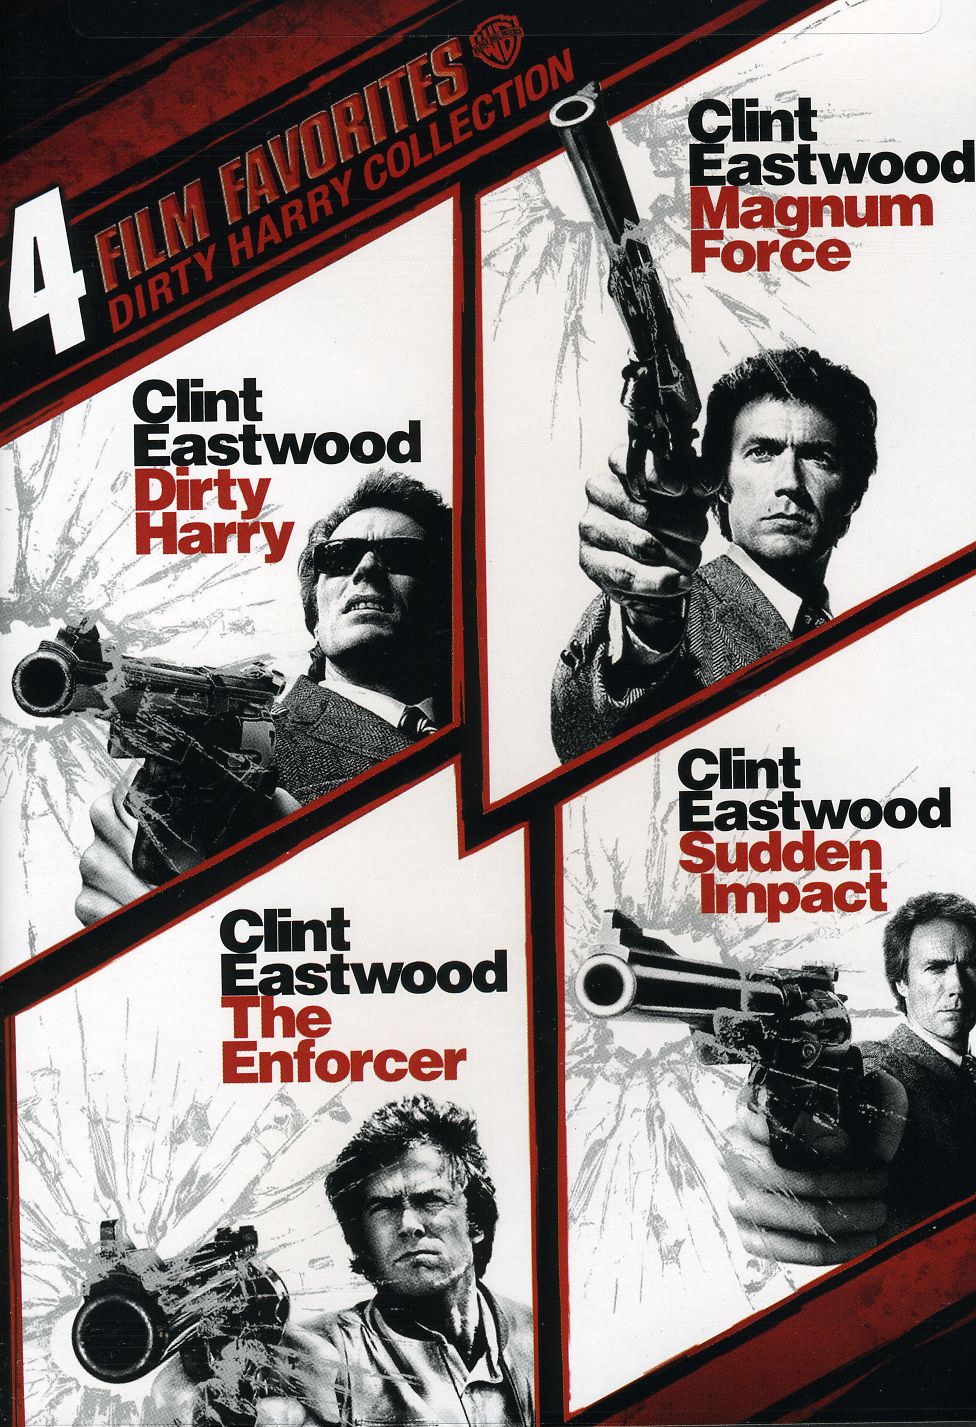 4 FILM FAVORITES: DIRTY HARRY COLLECTION (2PC)